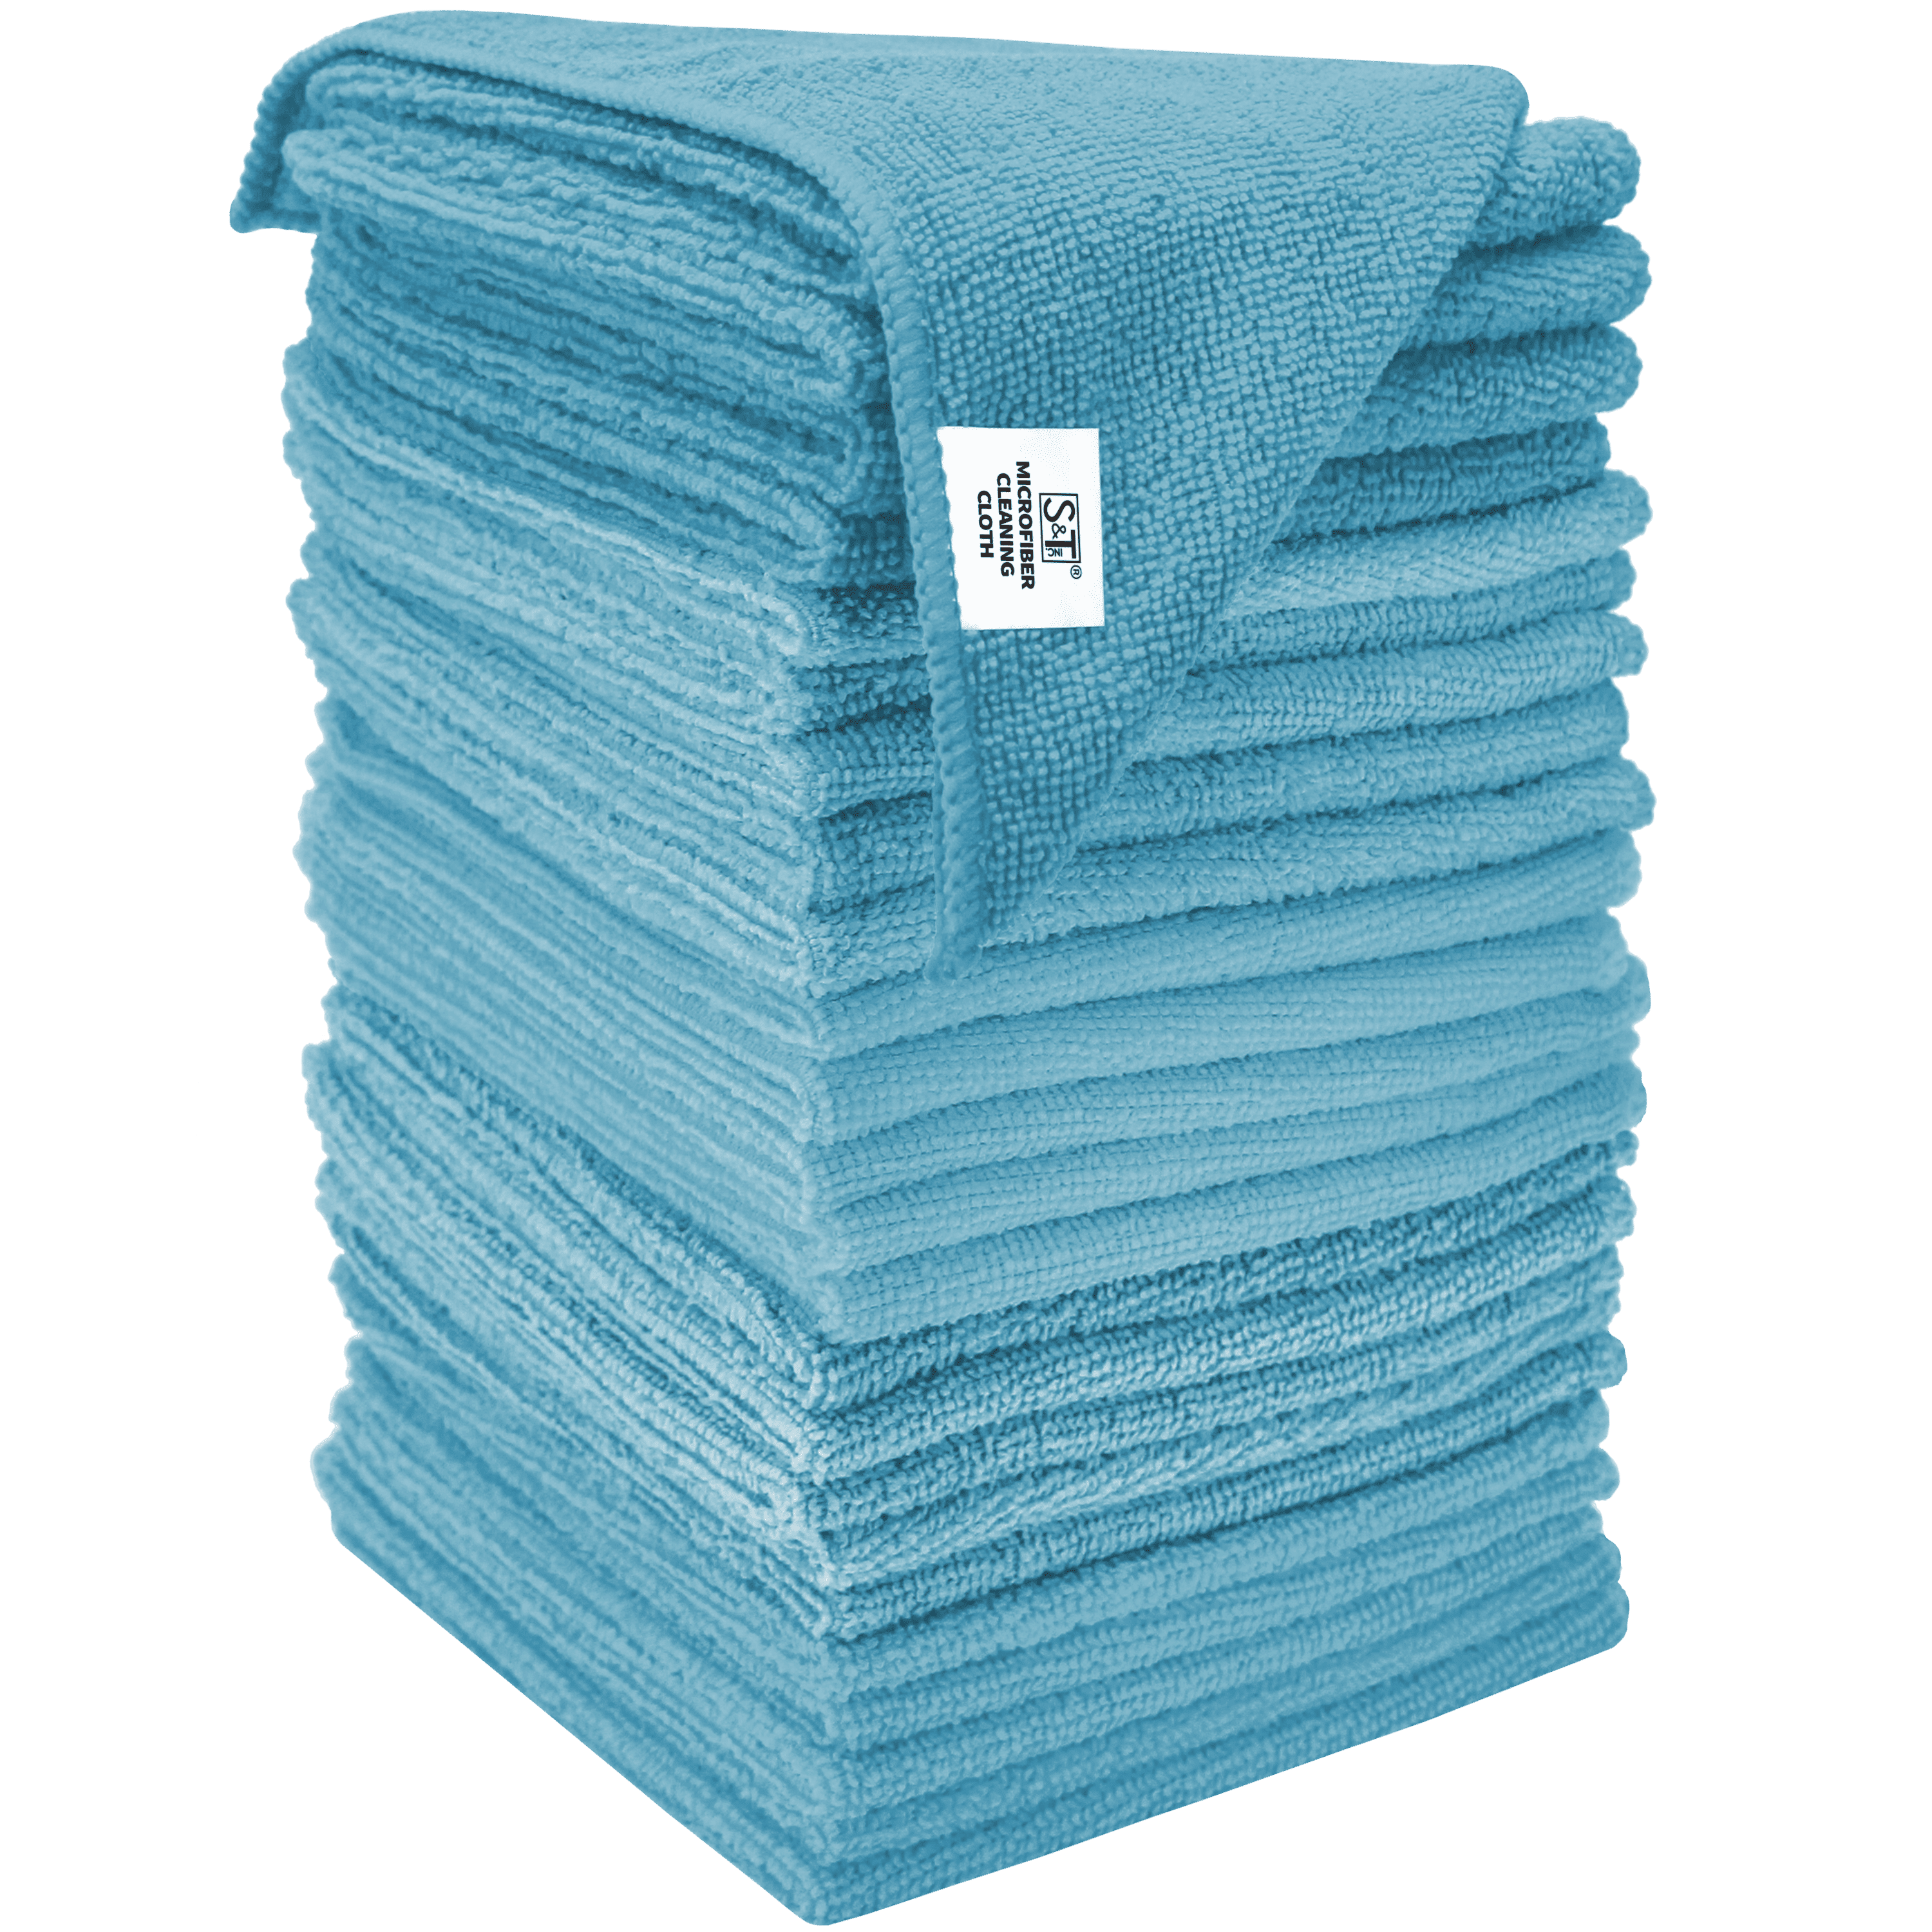 5 Piece High Performance Microfibre Microfiber Cleaning Cloth Polishing Cloth Cleaning Cloths blue 